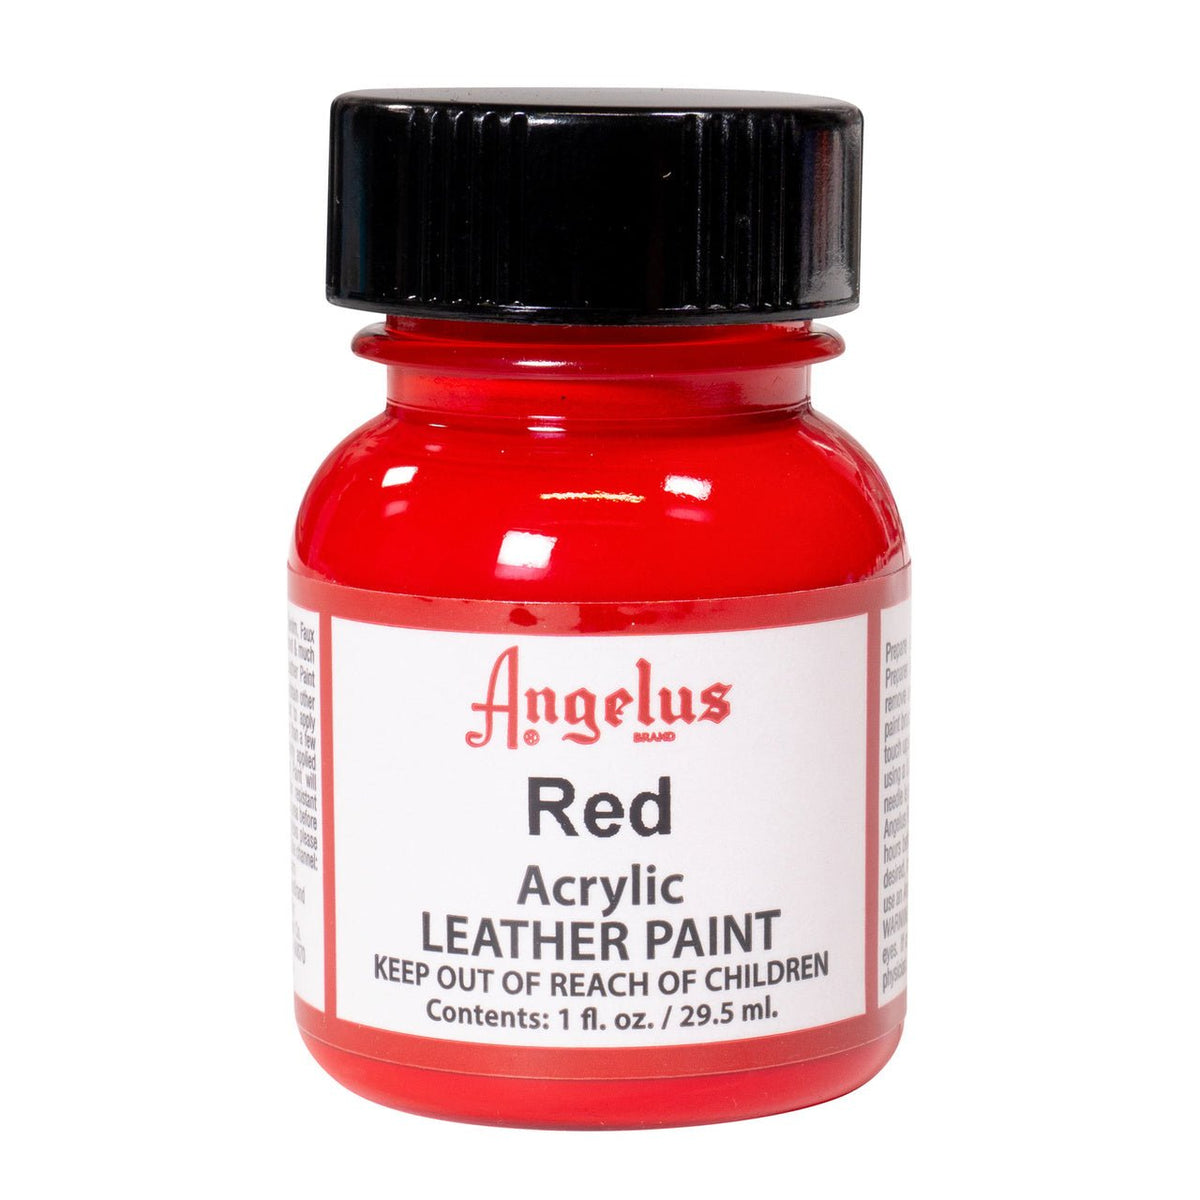 Angelus Acrylic Leather Paint - 1 oz. Bottle - Red - merriartist.com